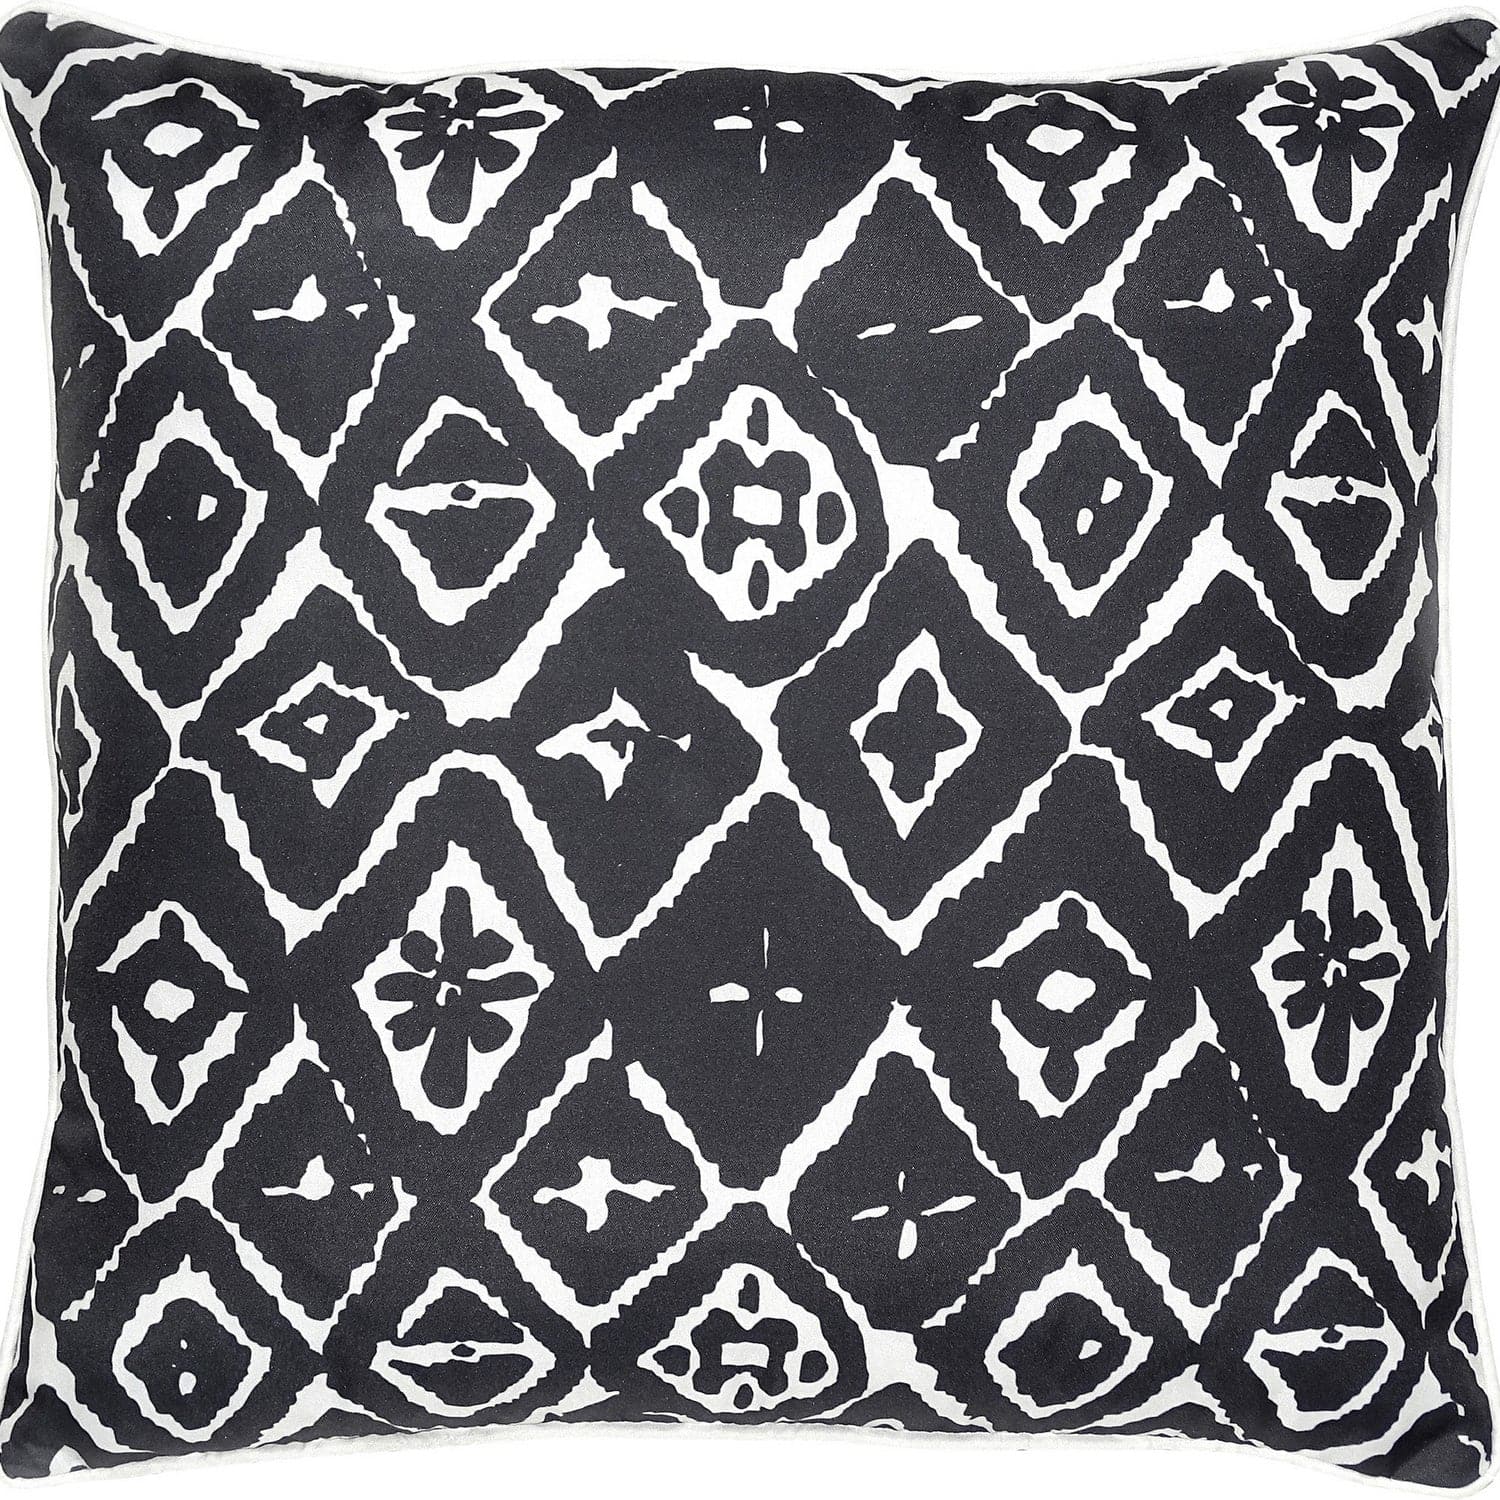 Renwil - PWFLO1003 - Home Accents - Rugs/Pillows/Blankets